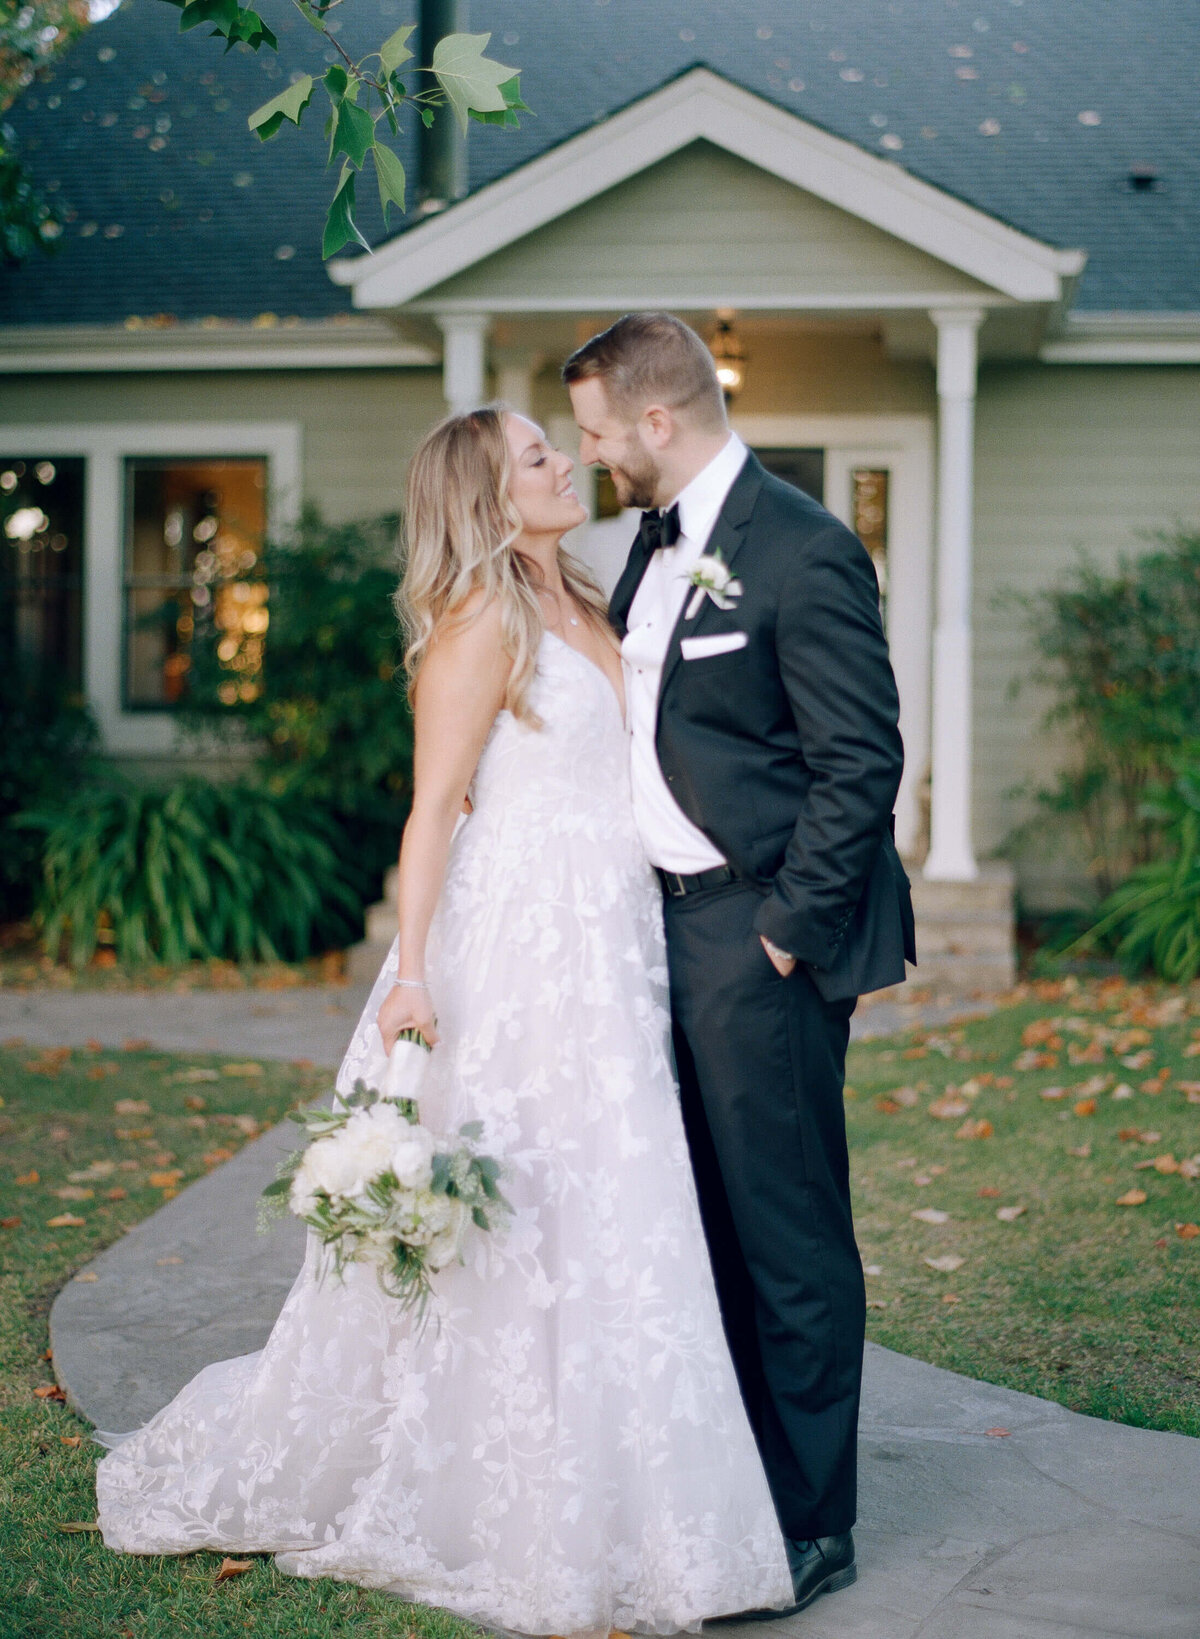 Just-married bride and groom share an intimate moment together in front of an American-style country home. Dressed in sophisticated Christian wedding attires, the wife holds a white bouquet while a maple tree branch hangs from top.